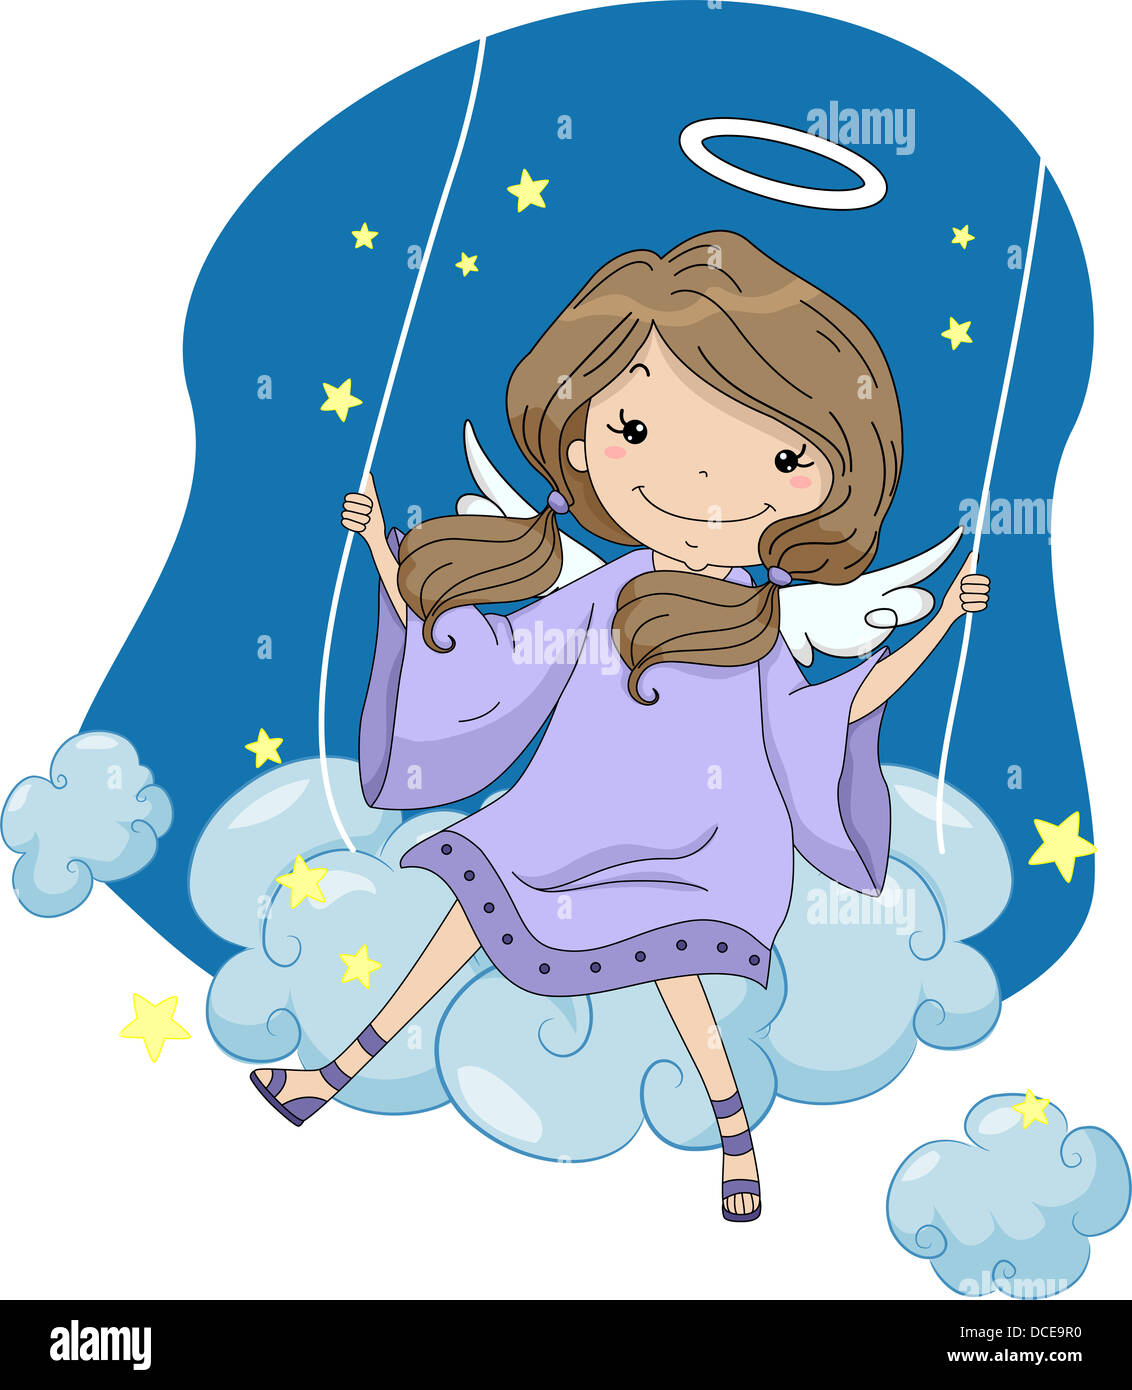 Illustration of a Girl Angel in a Cloud Swing Stock Photo